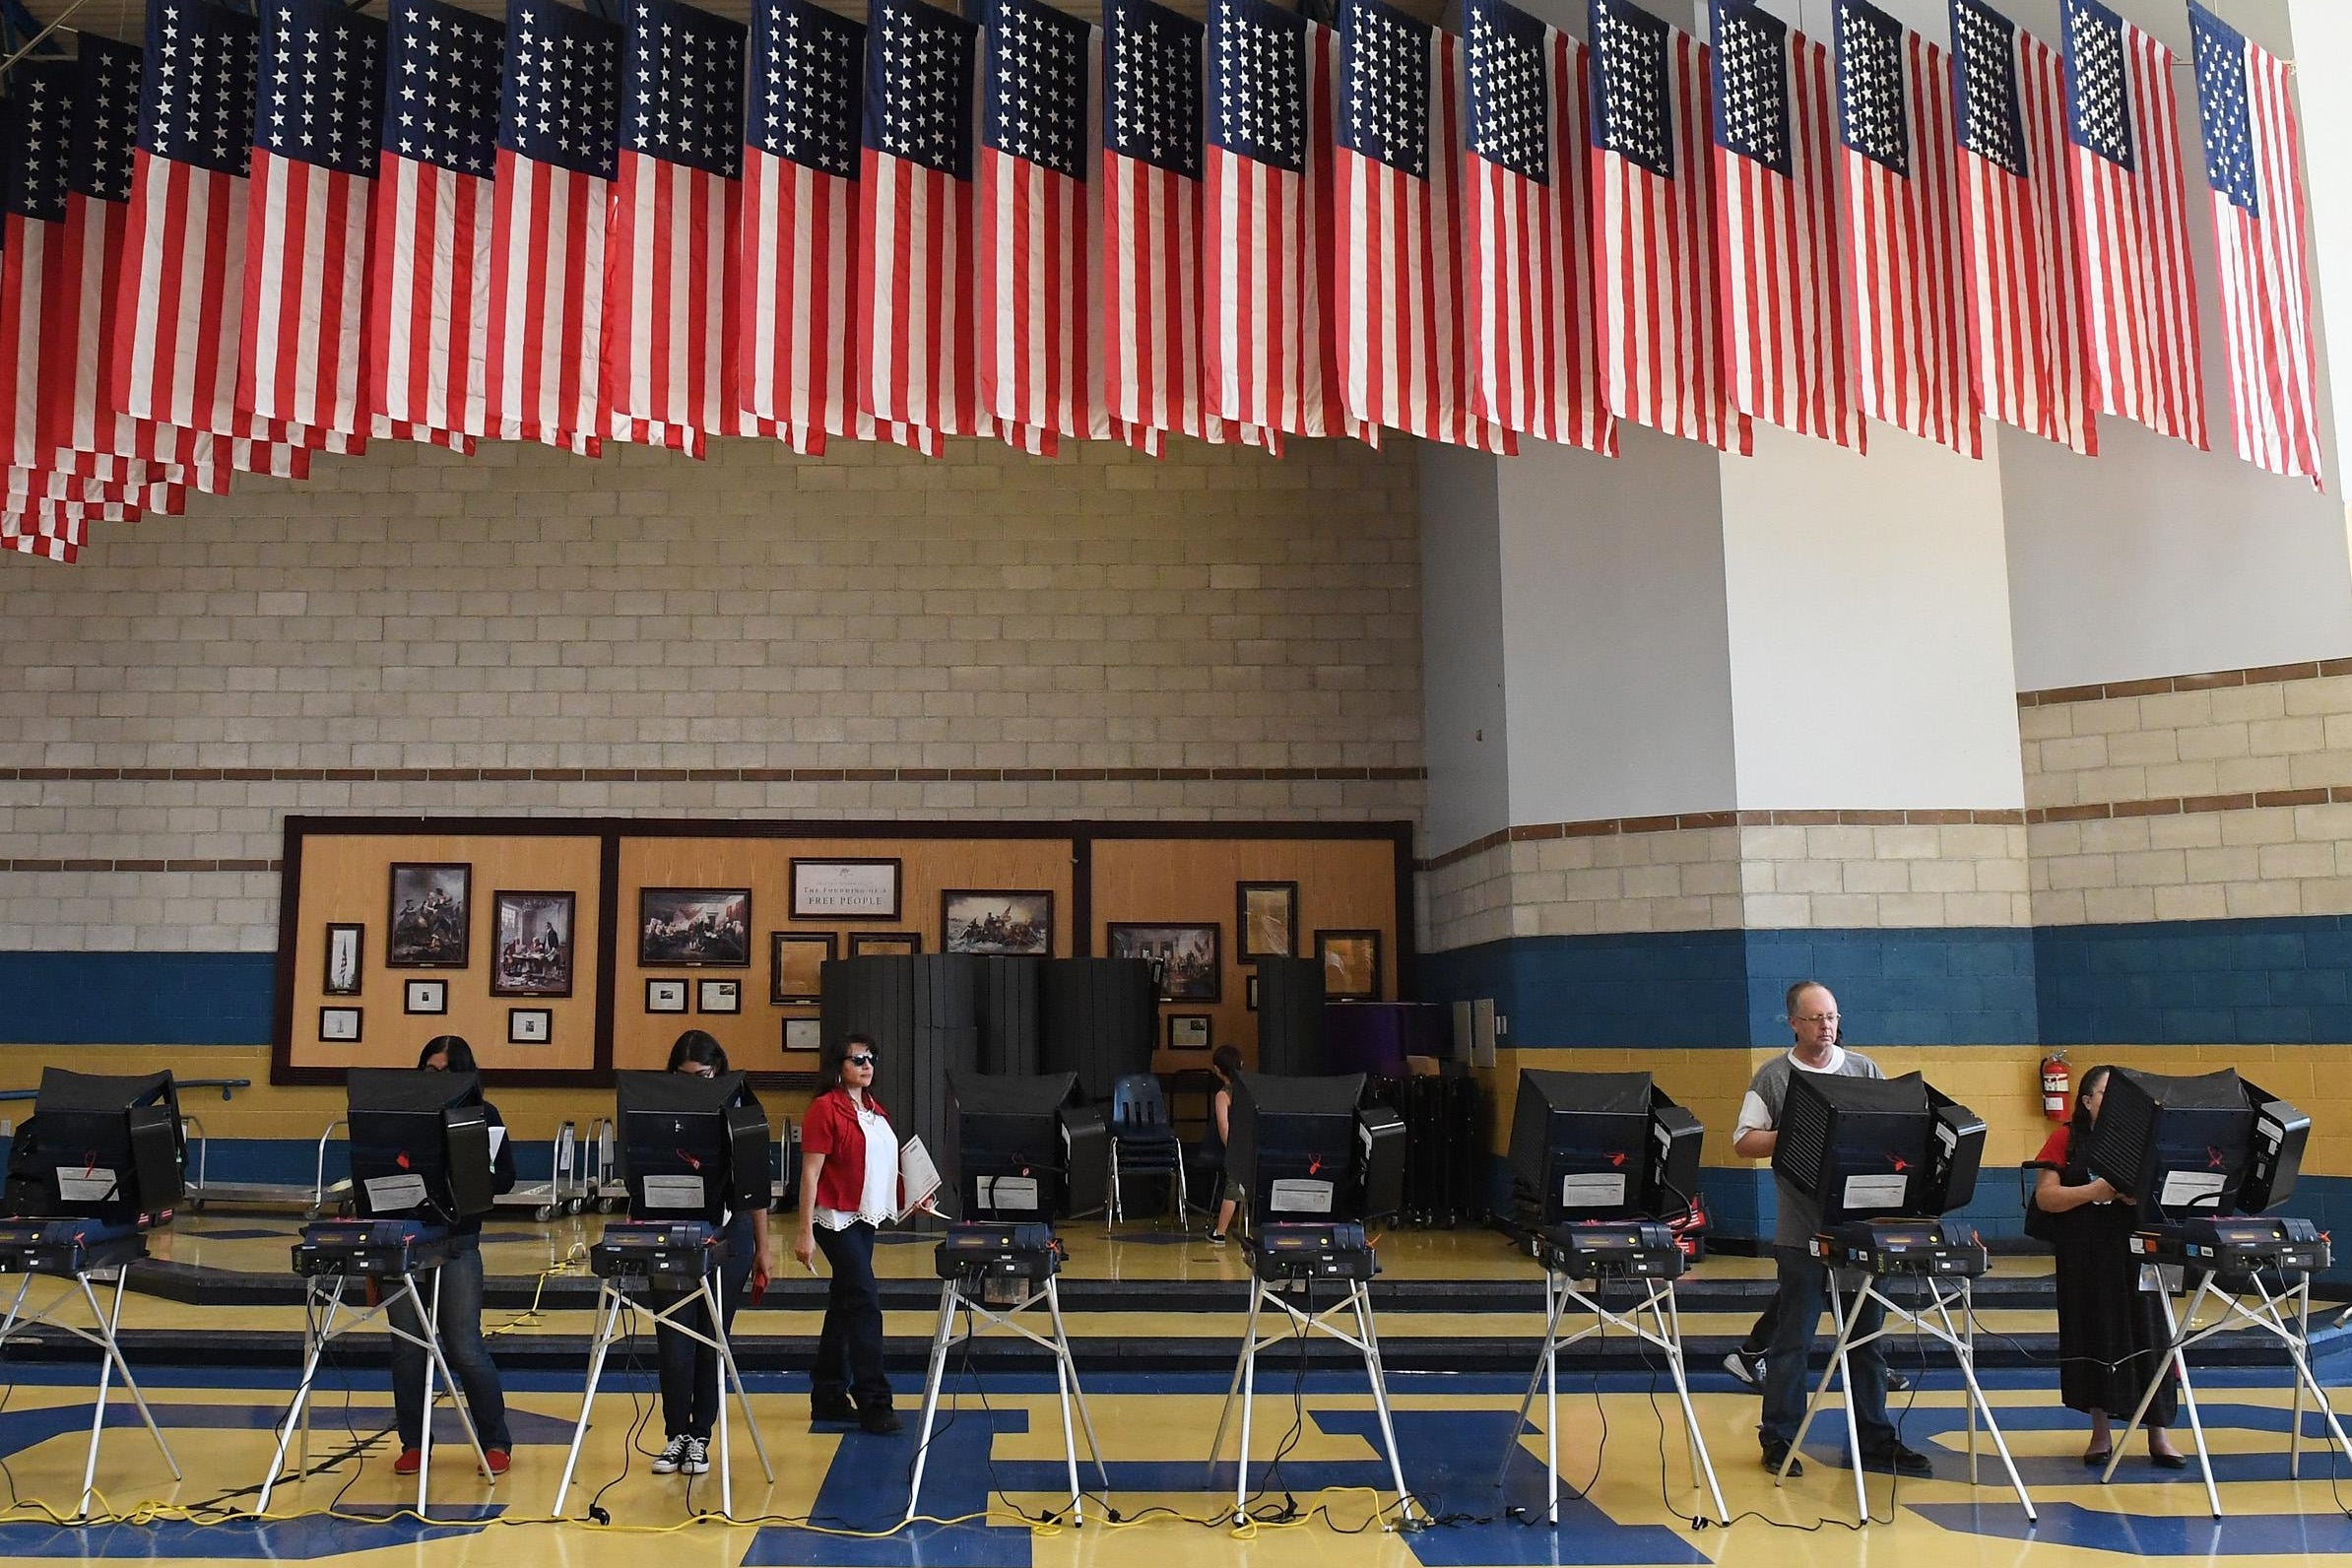 Voters stand behind electronic voting machines.